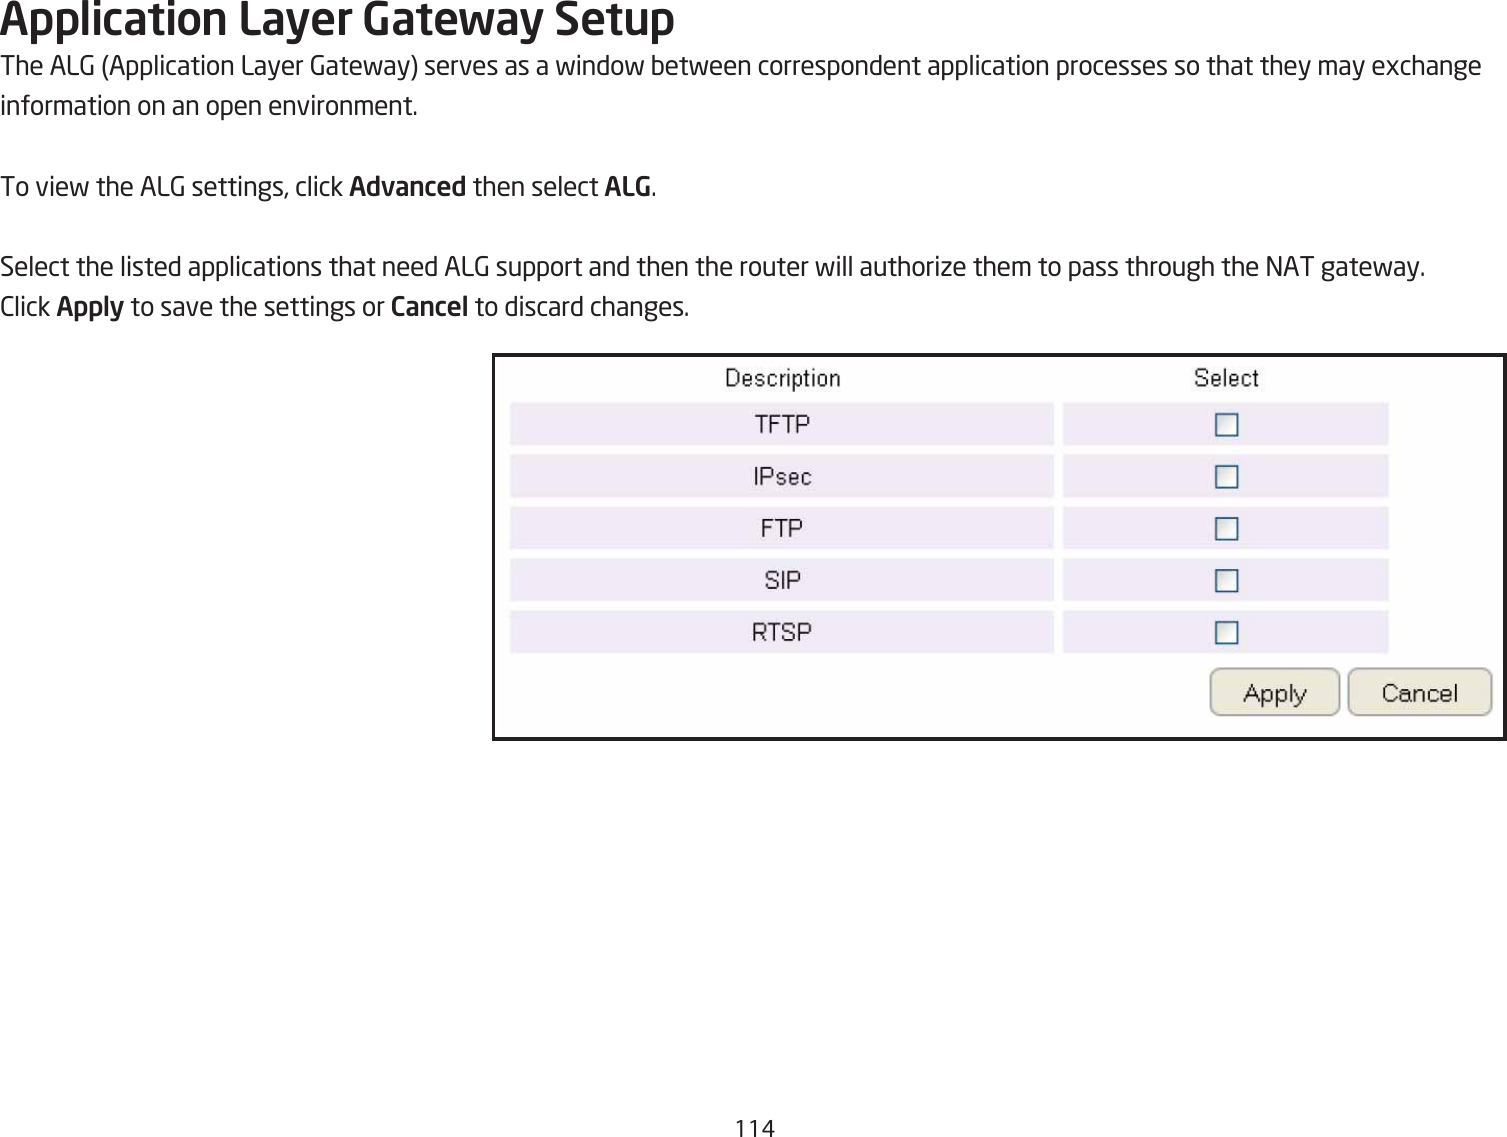 11#Application Layer Gateway SetupThe AL6 Application Layer 6atefay serves as a findof Qetfeen correspondent application processes so that they may egchangeinformation on an open environment.To vief the AL6 settings, click Advanced then select ALG.Select the listed applications that need AL6 support and then the router fill authoriie them to pass through the =AT gatefay.2lick Apply to save the settings or Cancel to discard changes.